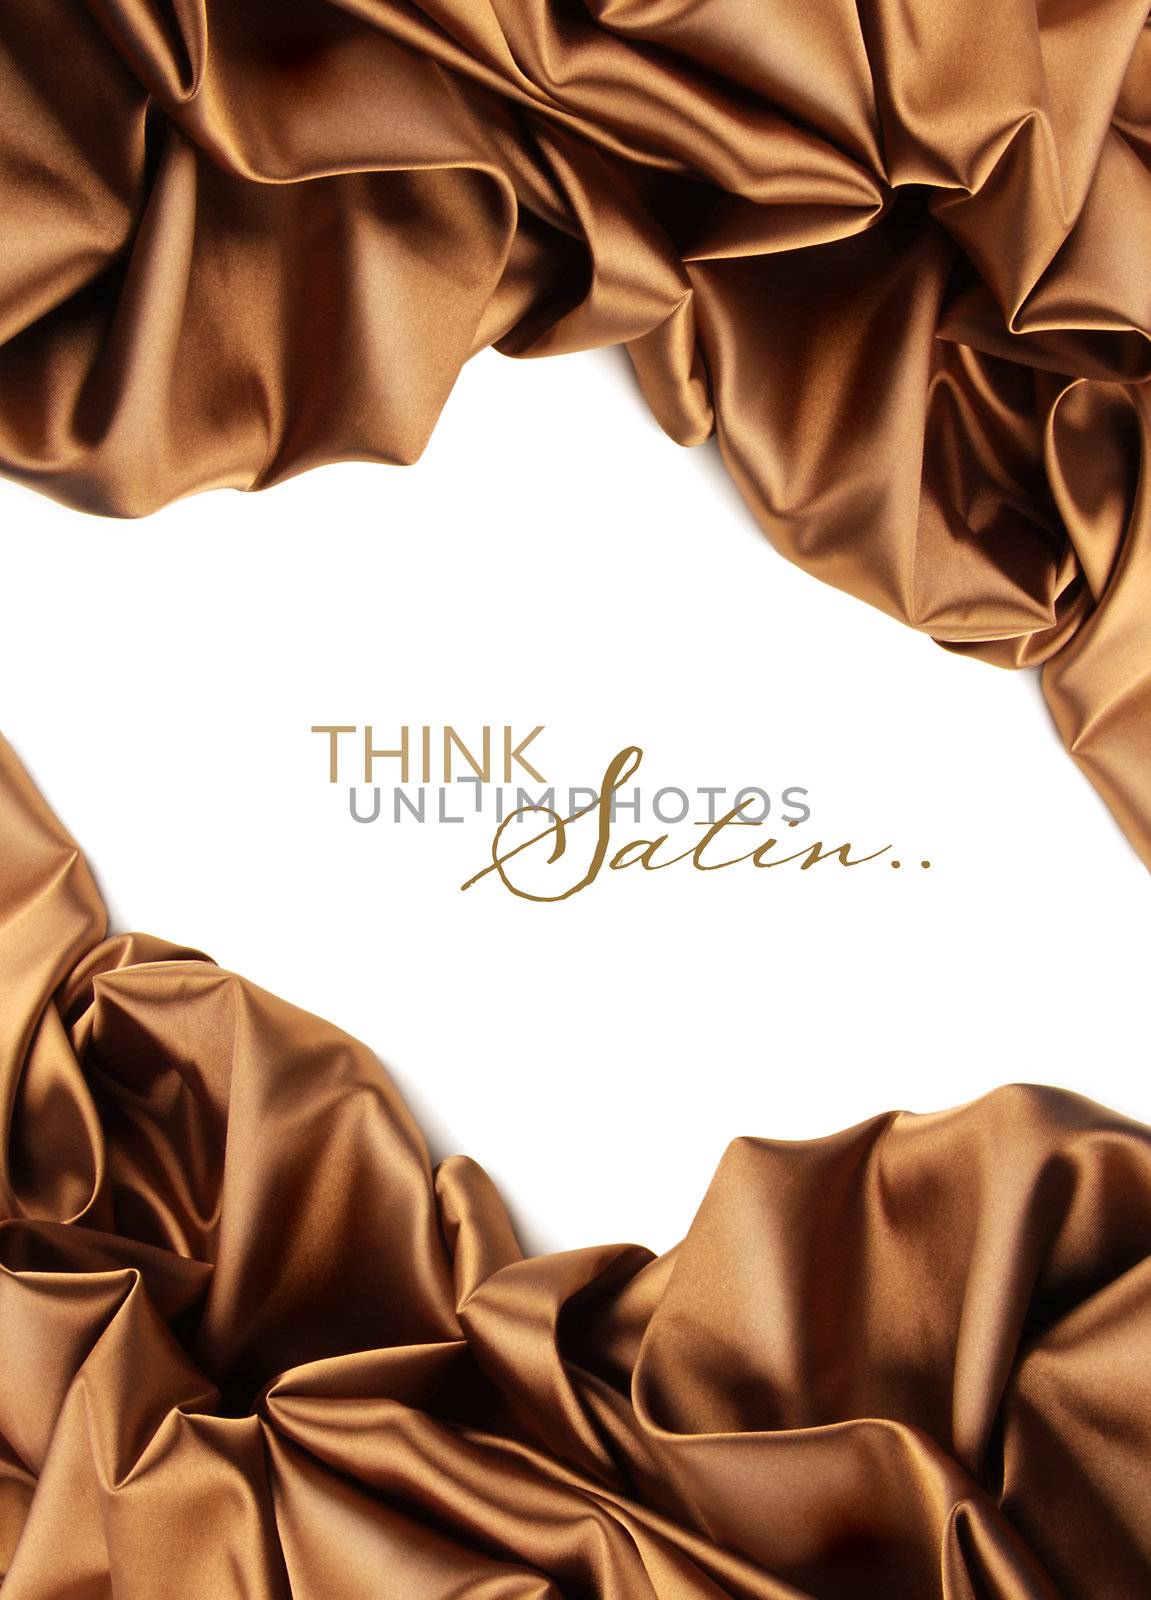 Rich golden brown satin fabric on white by Sandralise